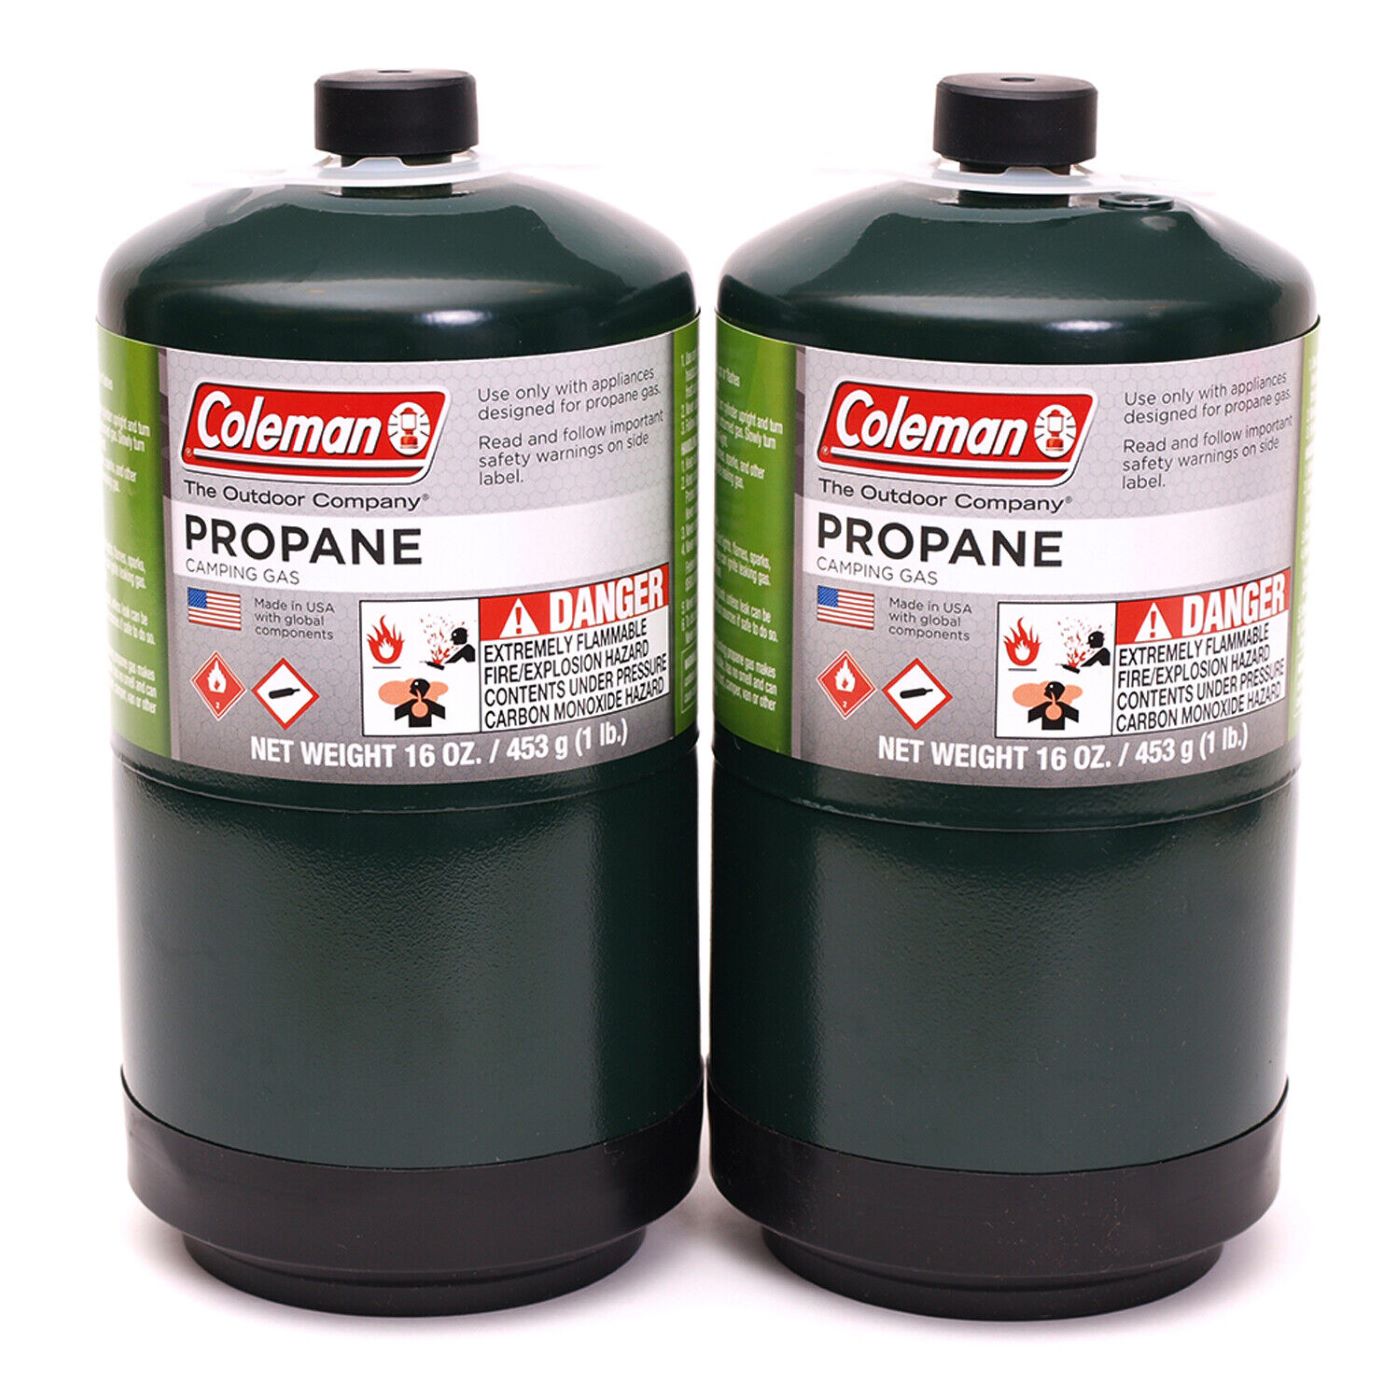 How To Store Small Coleman Propane Tanks